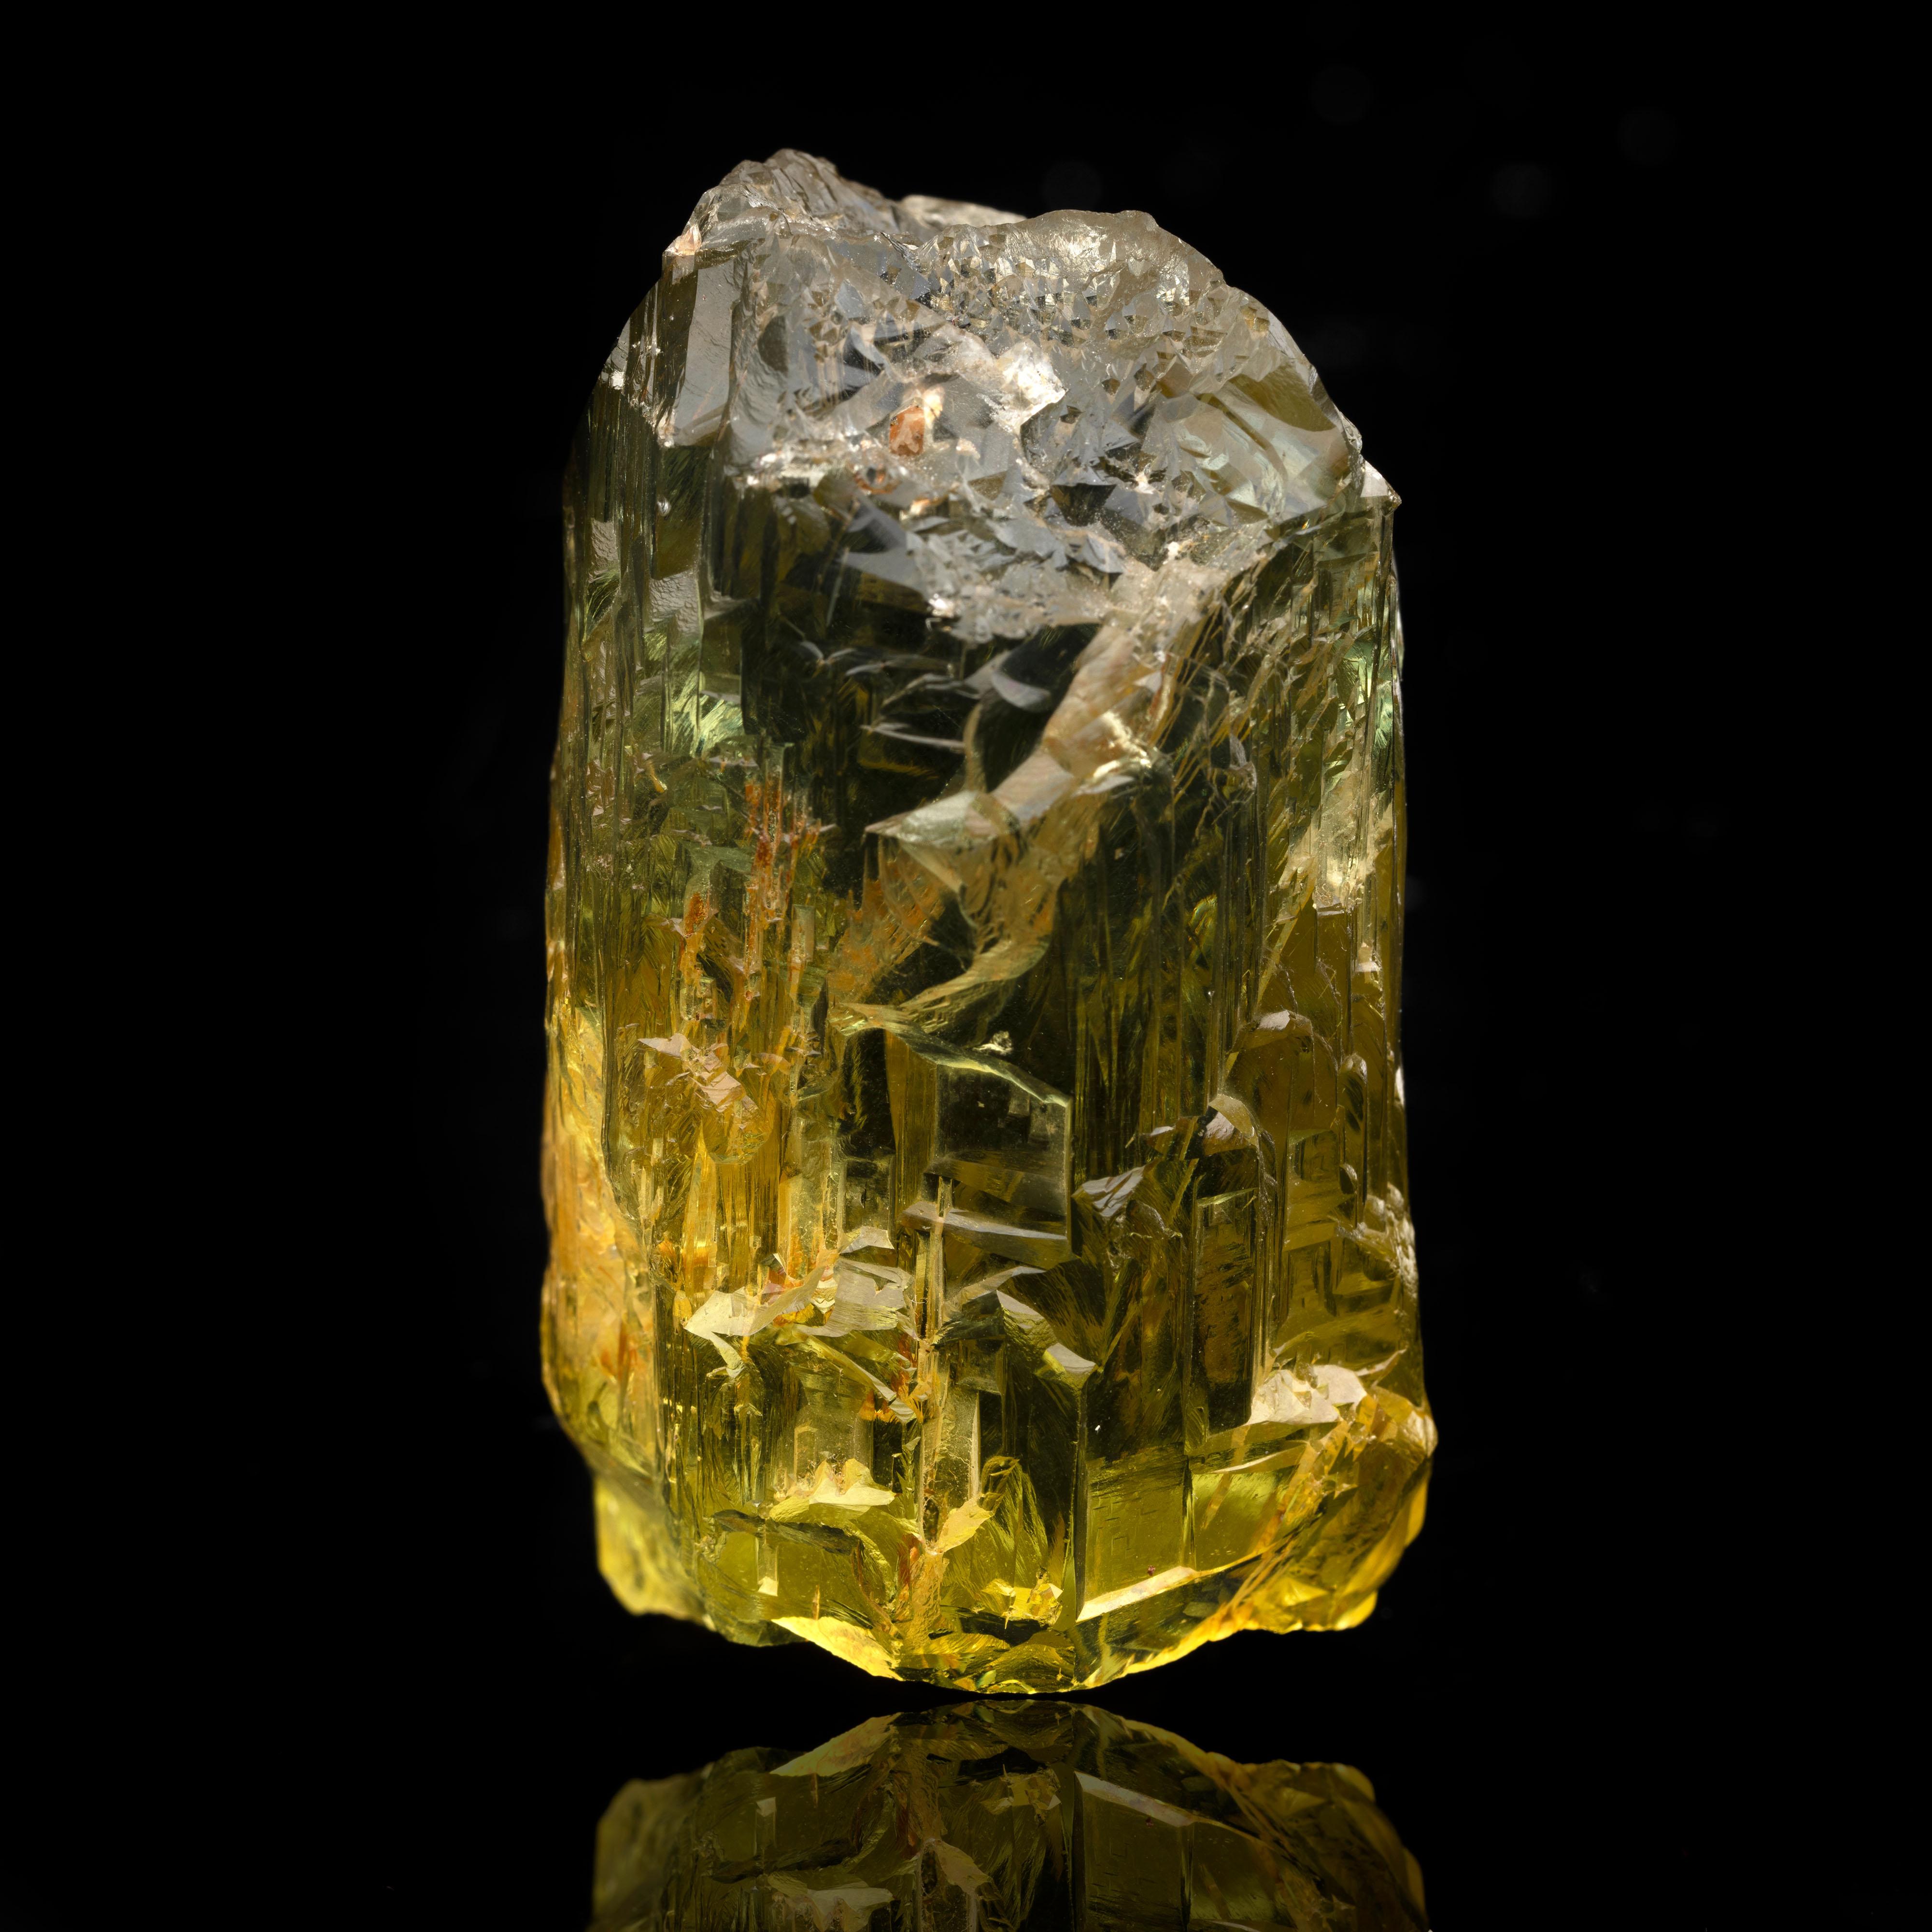 Discover the beauty of mineralogy at is finest with this rare Ukrainian heliodor. This exquisite greenish-yellow 144 gram specimen features excellent clarity and the characteristic natural etching adds exquisite detail. This AAA specimen will make a